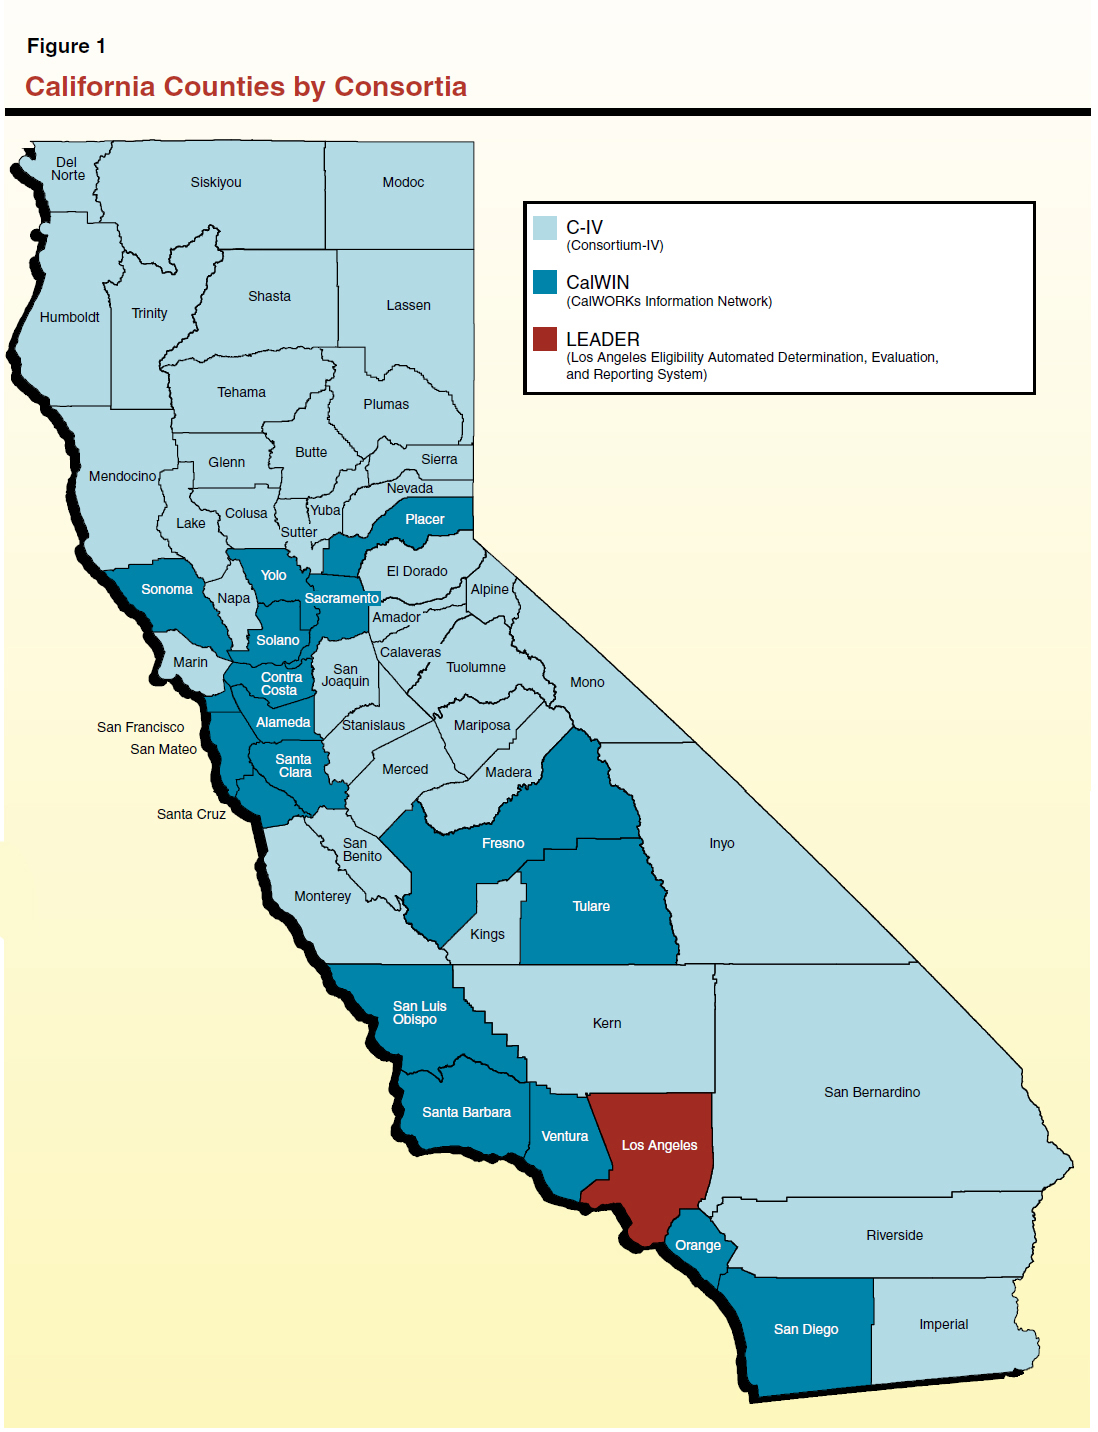 consolidating-california-s-statewide-automated-welfare-systems